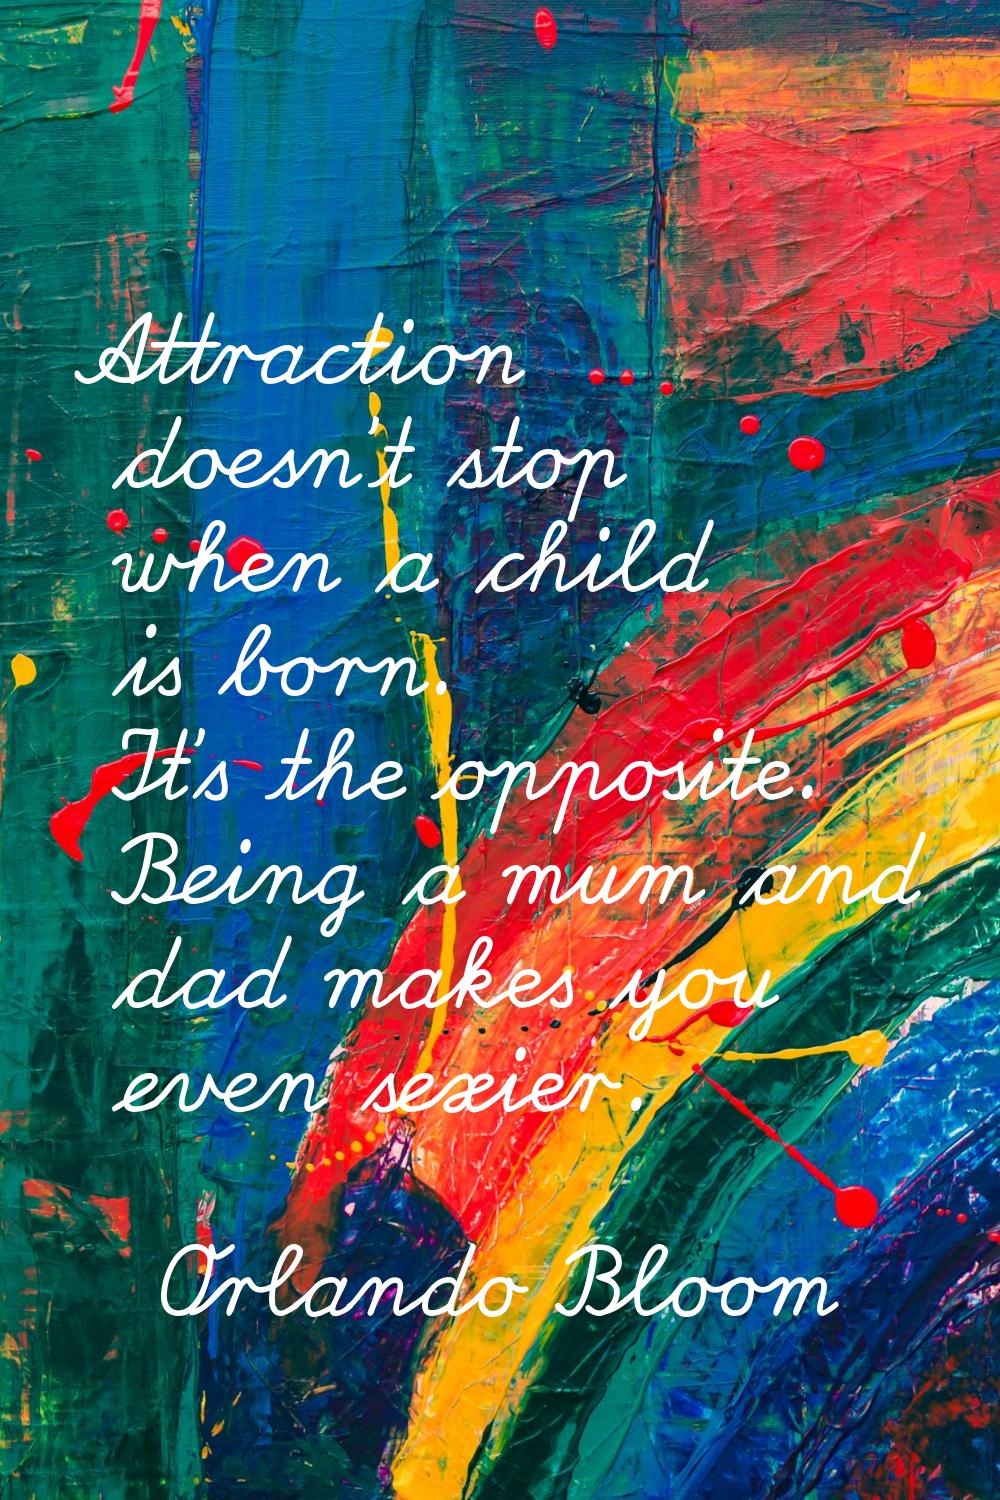 Attraction doesn't stop when a child is born. It's the opposite. Being a mum and dad makes you even